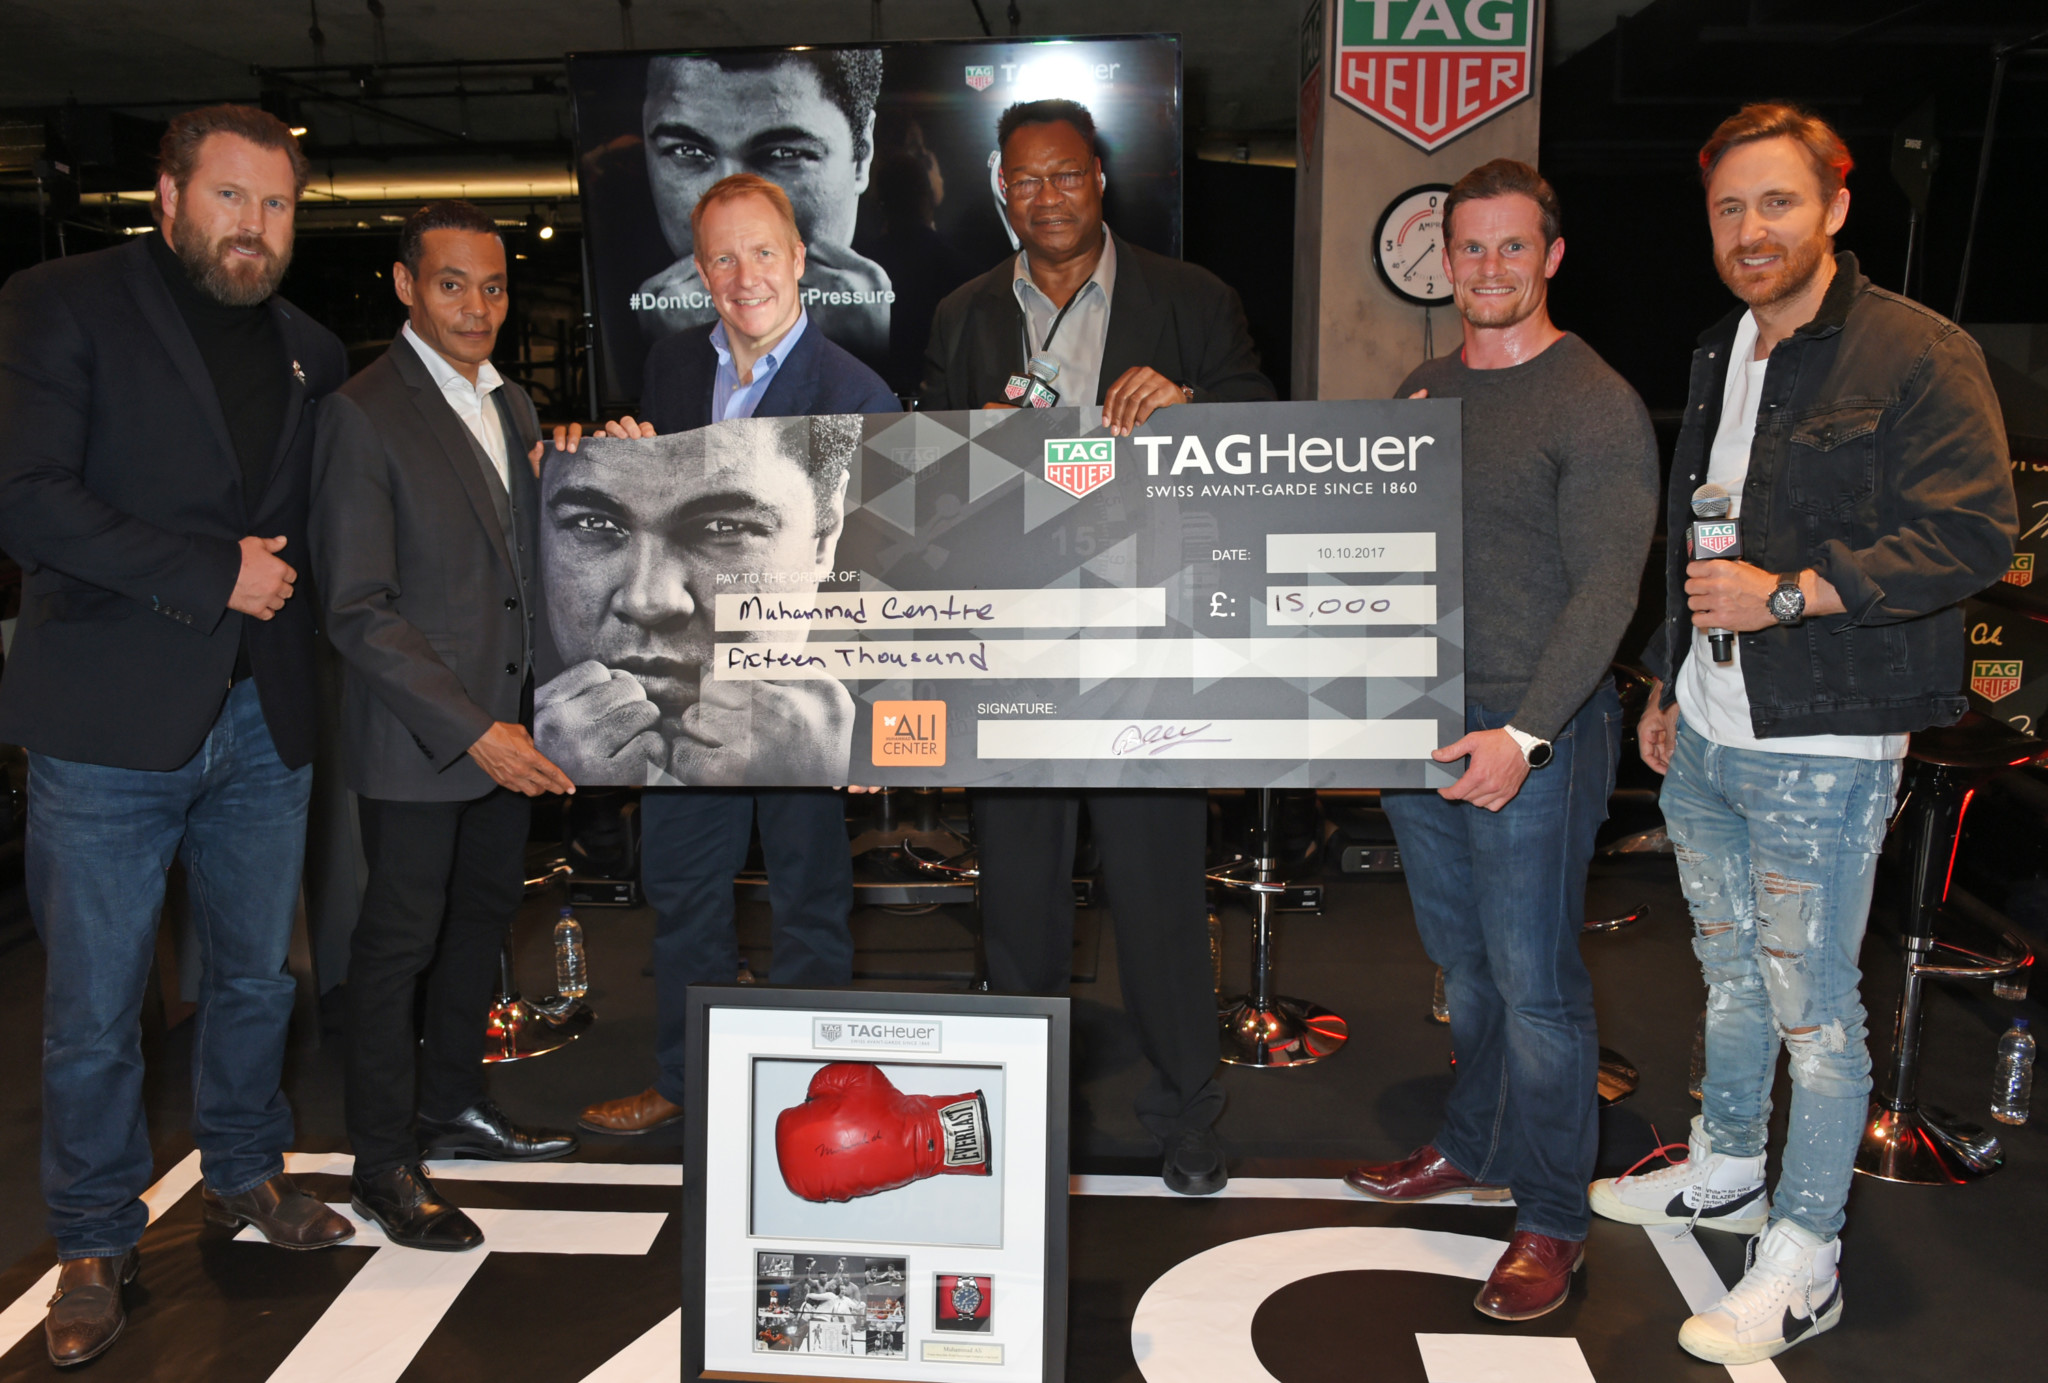 (l to r) scott welch, chairman of the world boxing council, donald e. Lassere, ceo of the muhammad ali center, larry holmes, guest and david guetta attend the launch of the tag heuer muhammad ali limited edition timepieces.